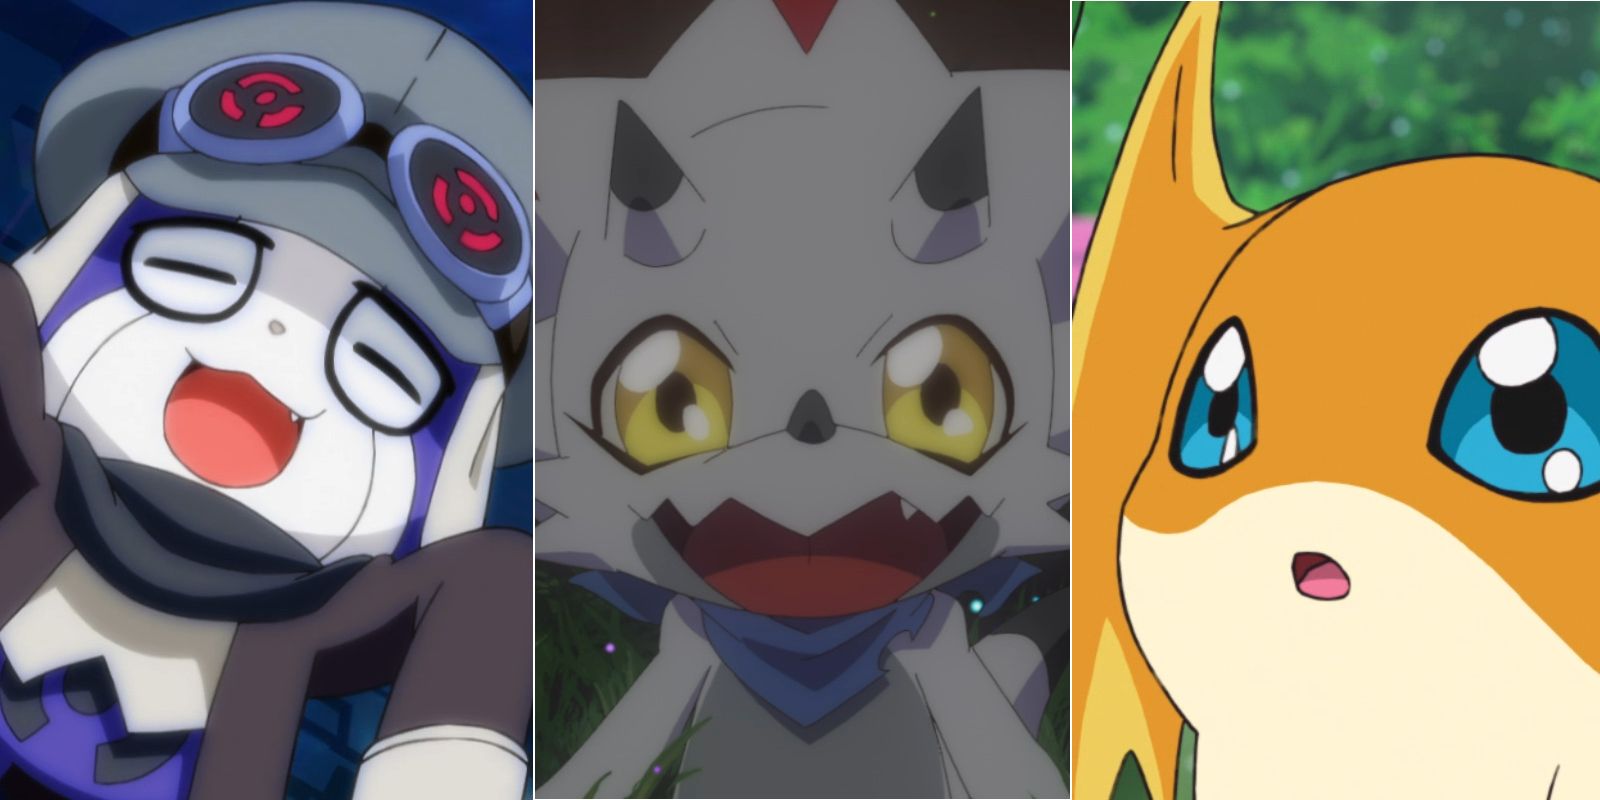 Three images of Offmon cheering, Gammamon smiling and Patamon looking concerned in Digimon